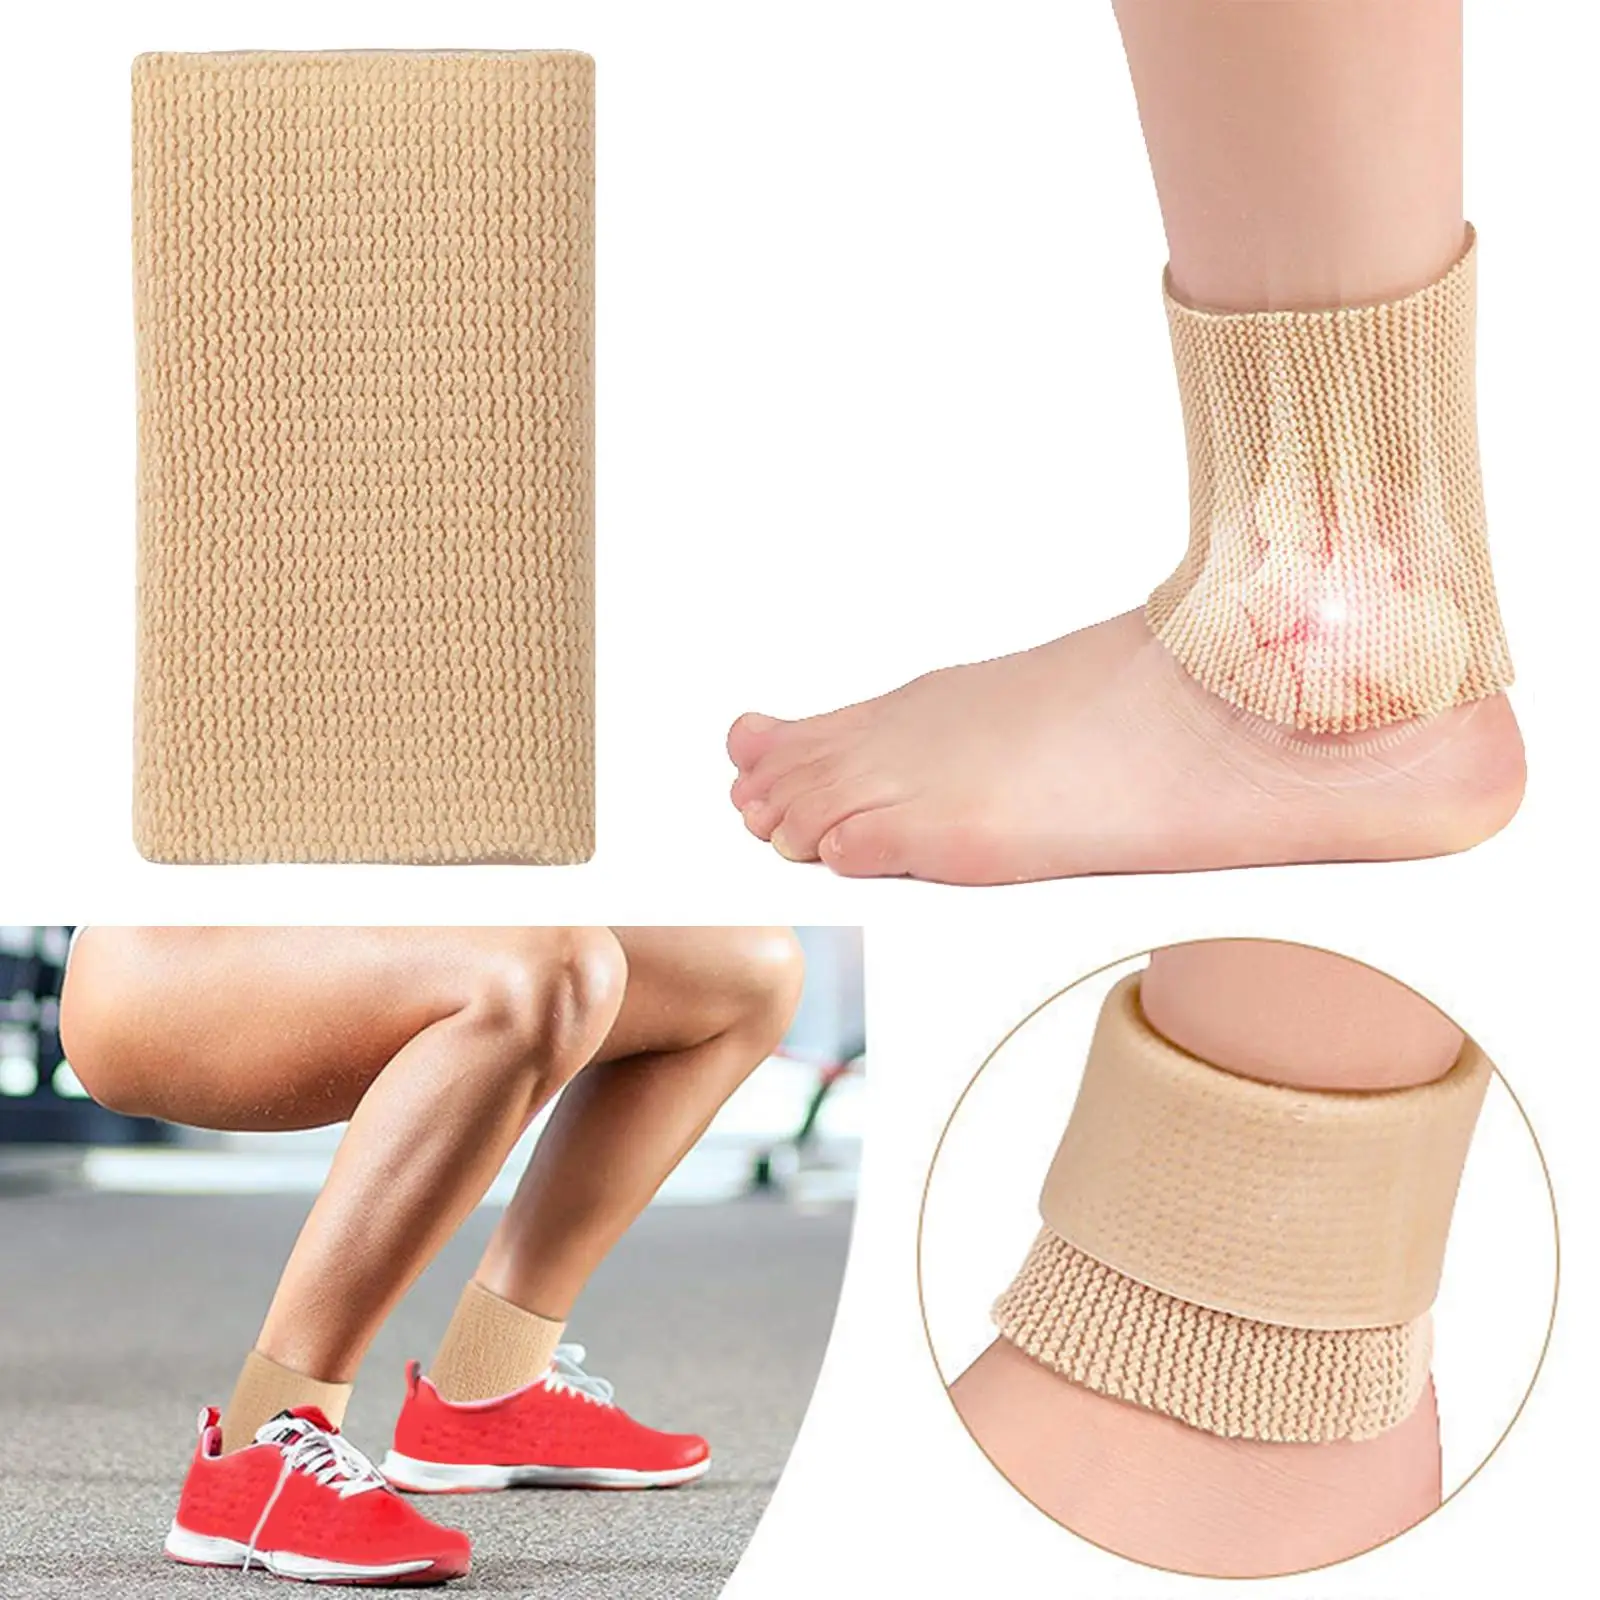 Ankles Brace Sleeve Elastic Protection Nylon Ankle Support for Running Sports Cycling